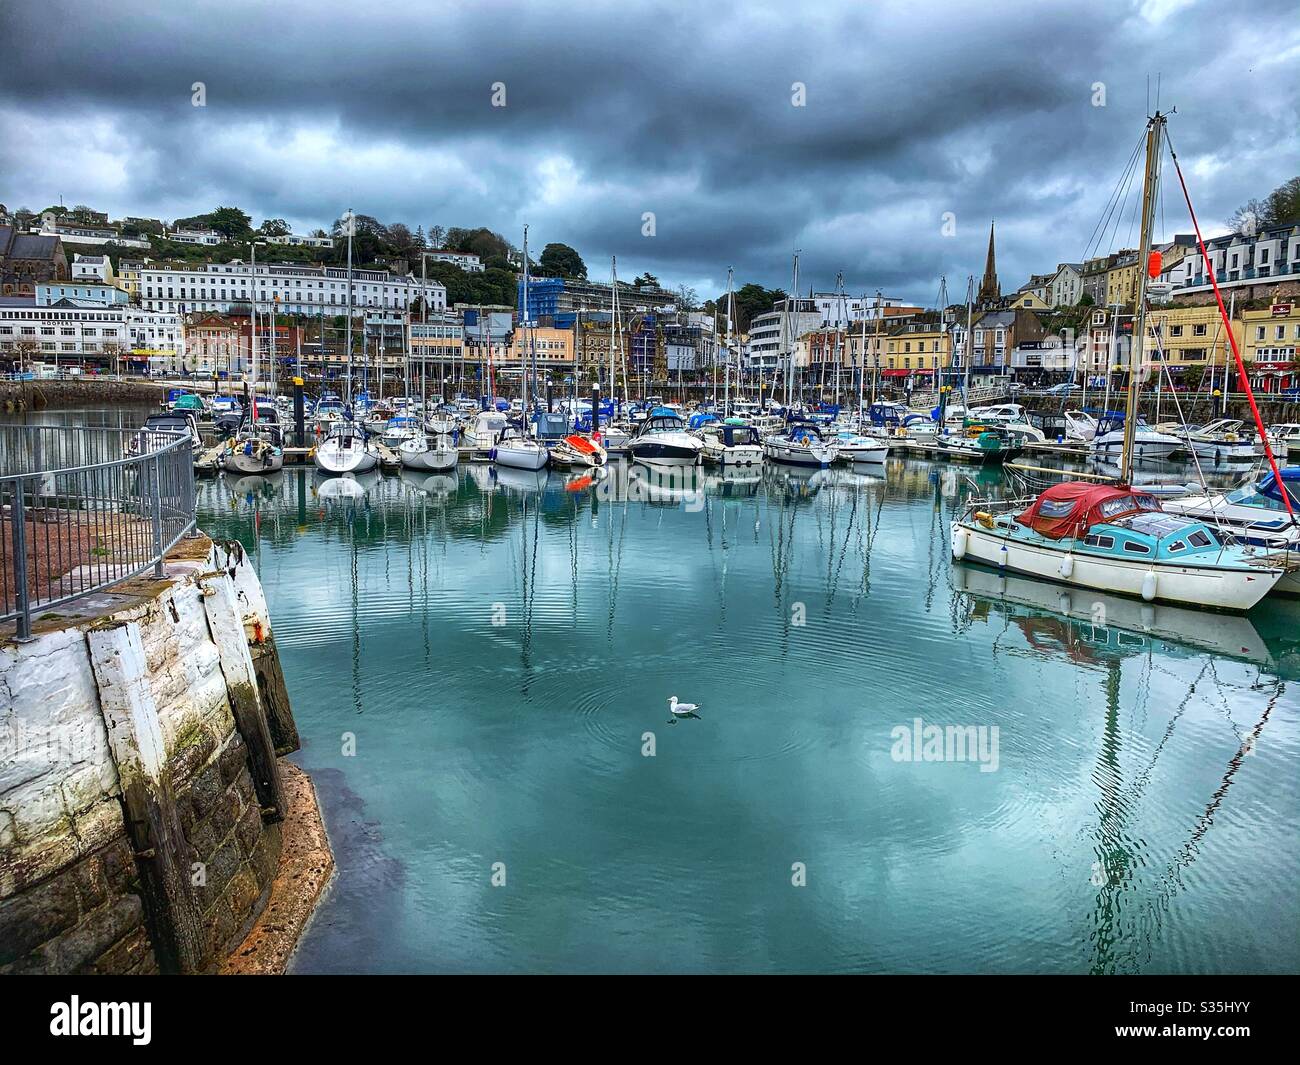 Torquay Harbour on a stormy day with a sea gull in the water, surrounded by boats and buildings. Stock Photo